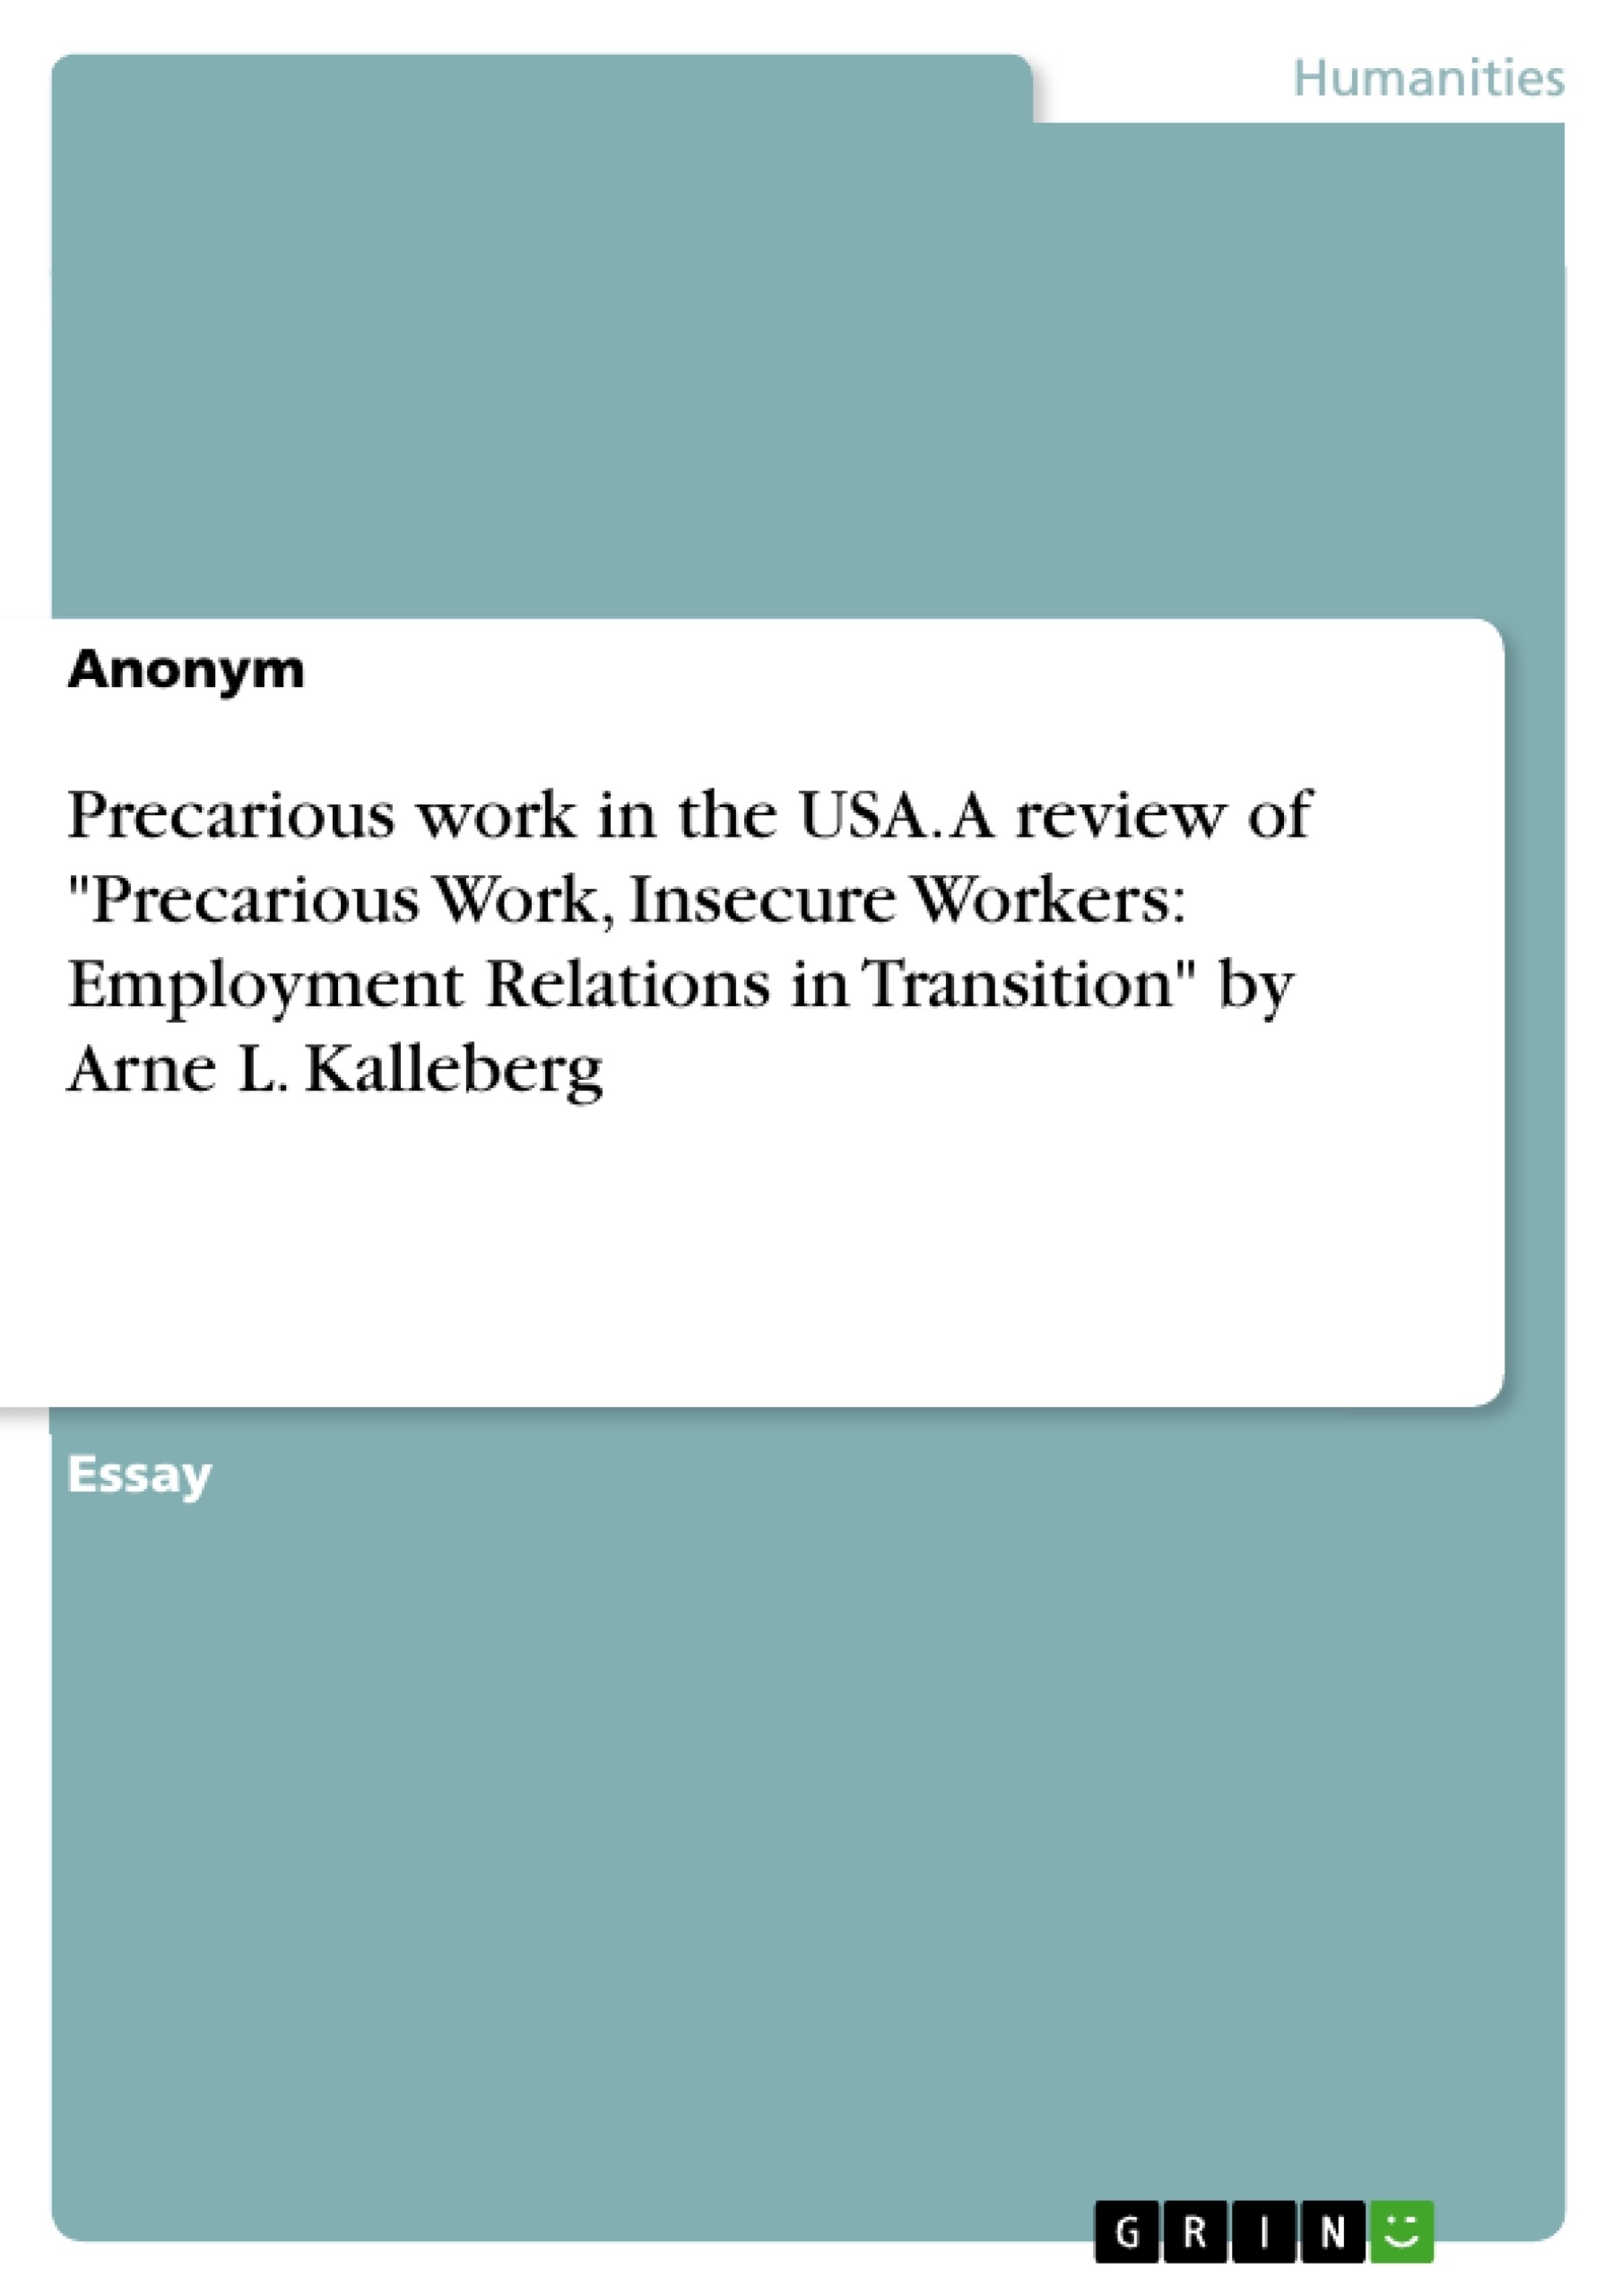 Title: Precarious work in the USA. A review of "Precarious Work, Insecure Workers: Employment Relations in Transition" by Arne L. Kalleberg